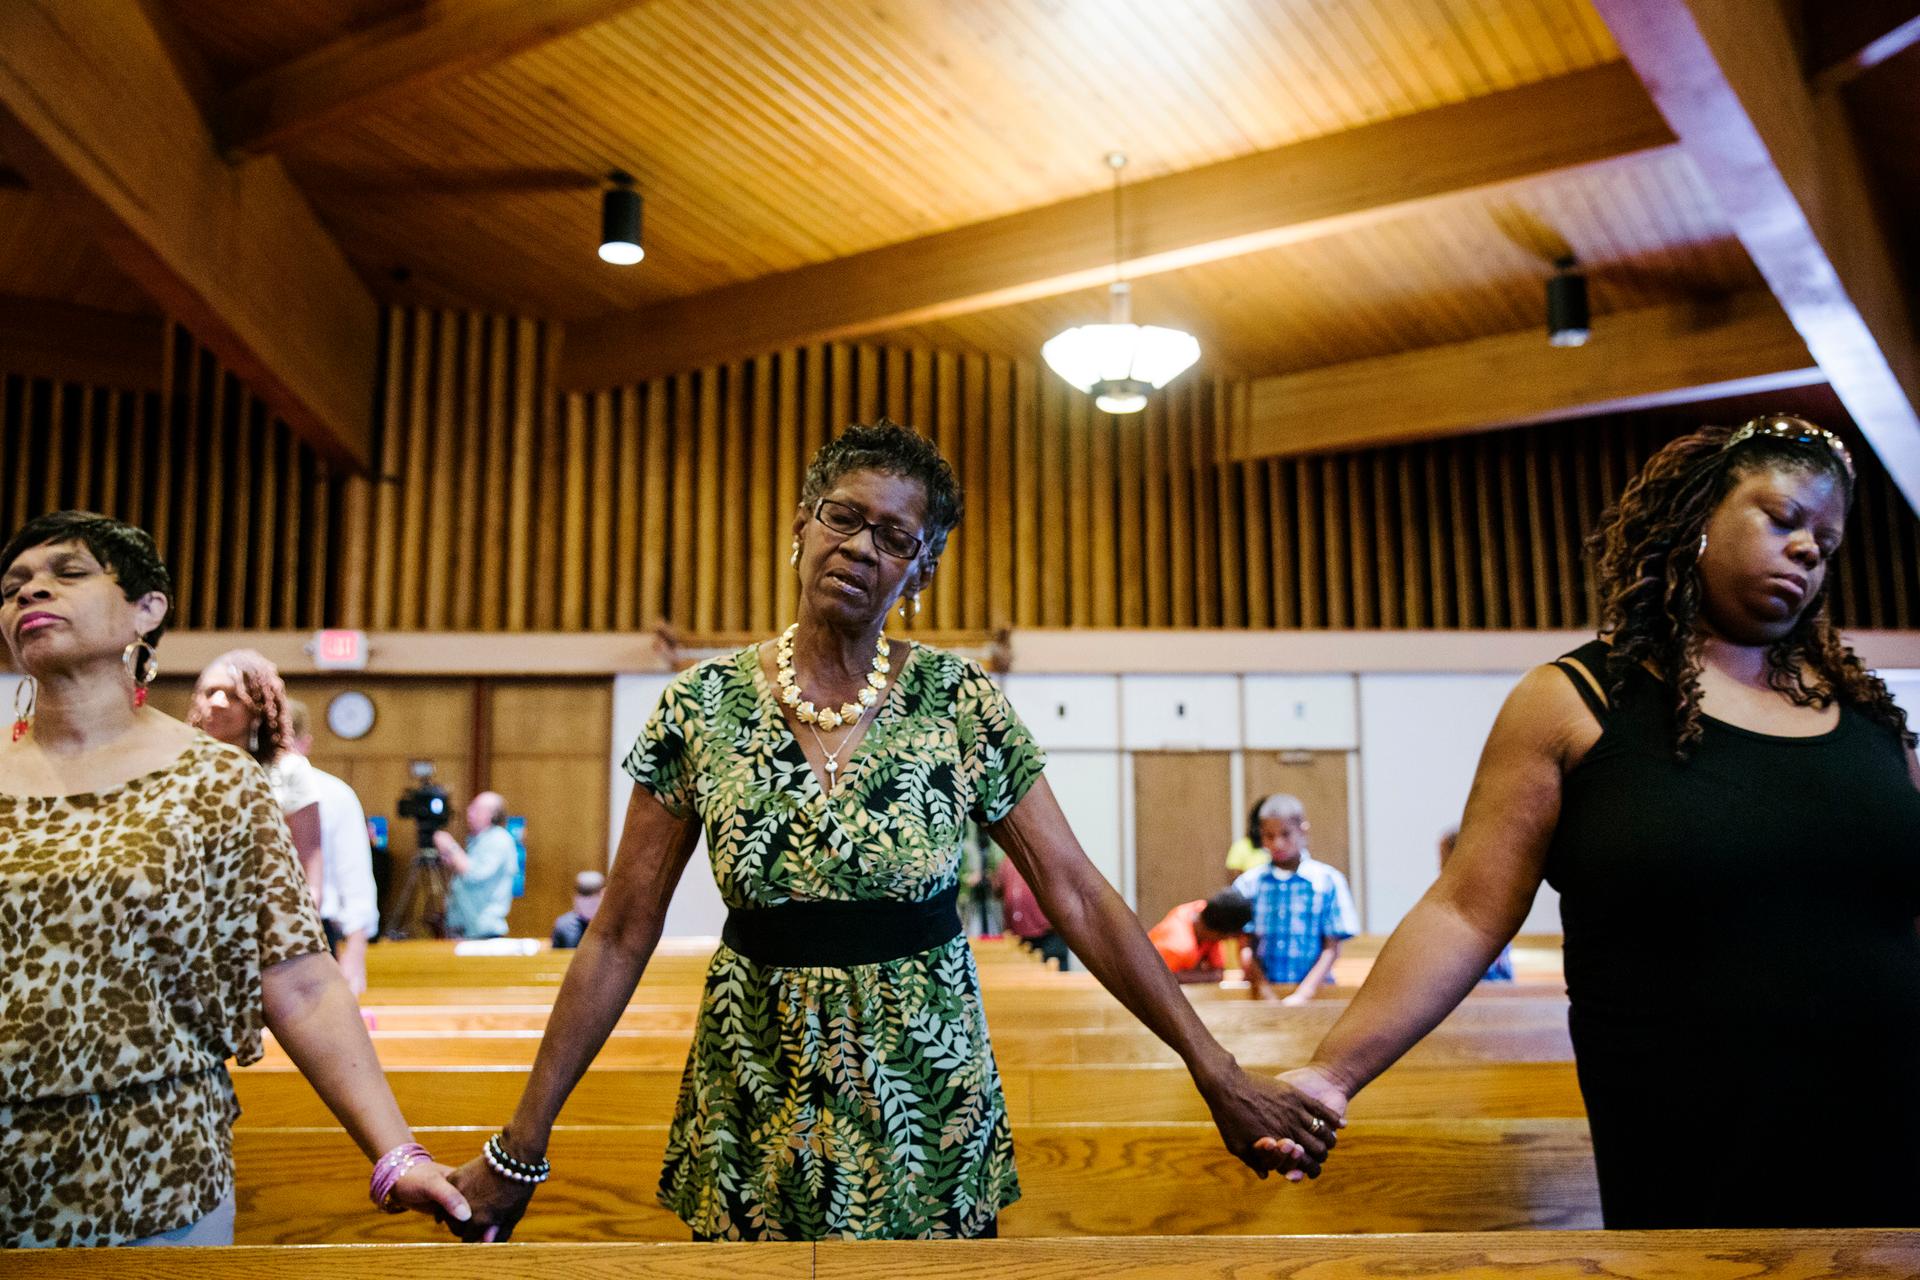 Parishioners hold hands during church services at the Greater St. Mark Family Church as the community discusses reactions to the shooting of teenager Michael Brown in Ferguson, Mo., on August 17, 2014.